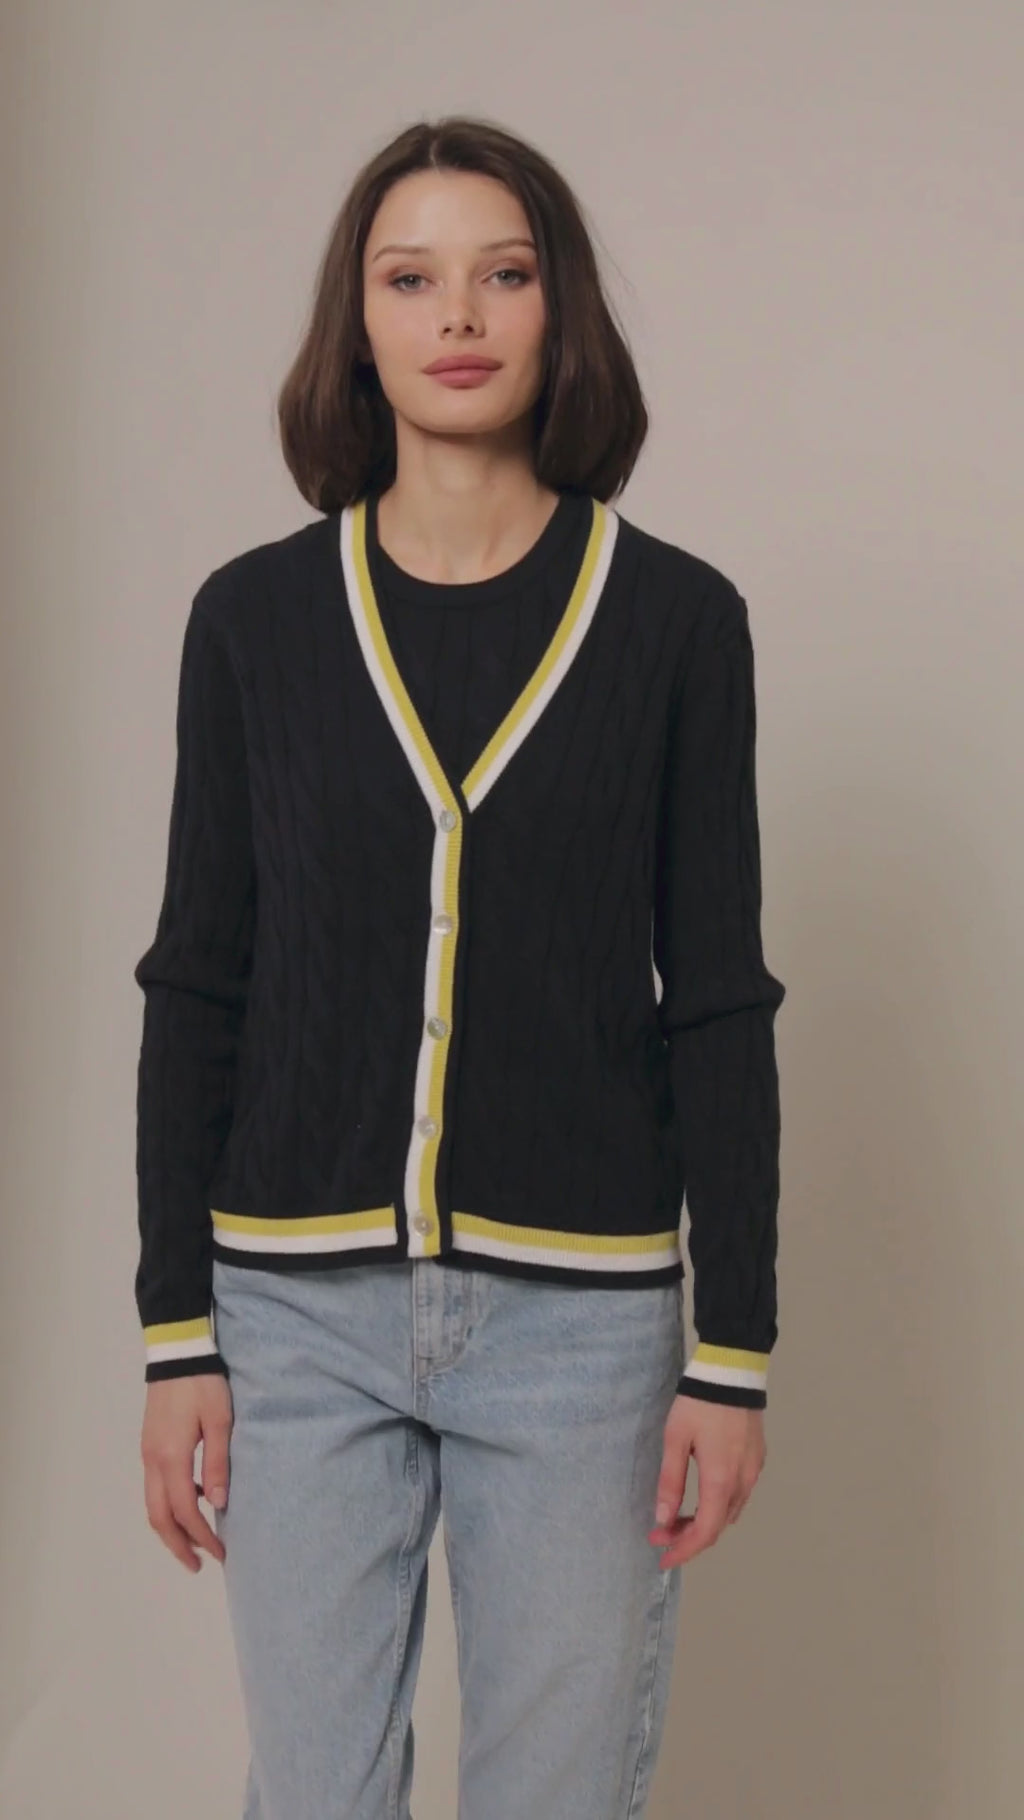 Navy cable knit cardigan with white and yellow stripes on the hem